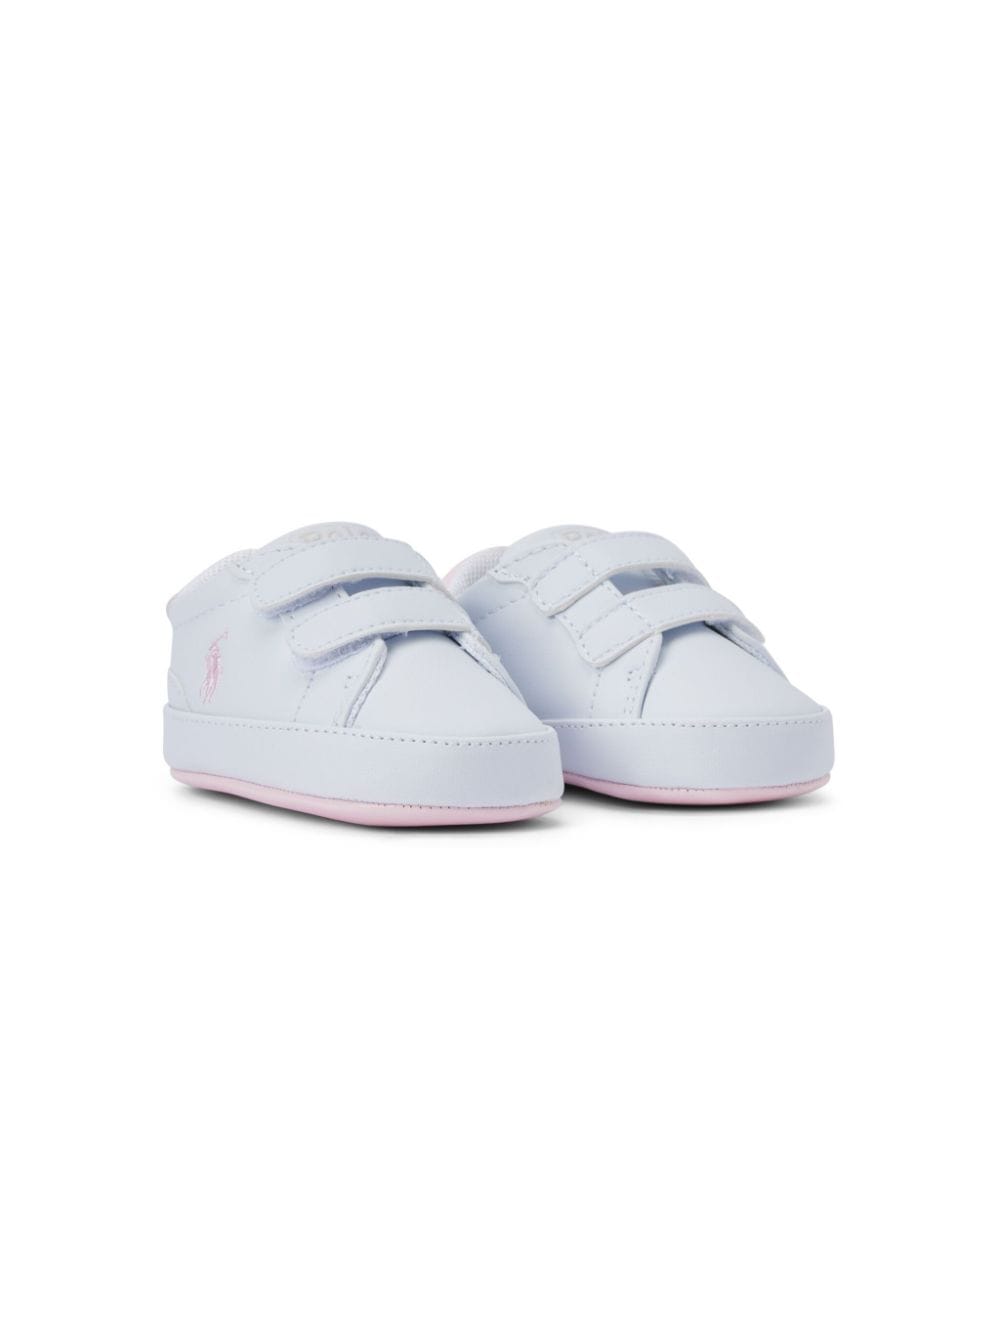 Ralph Lauren Babies' Polo Pony Touch-strap Sneakers In Blue